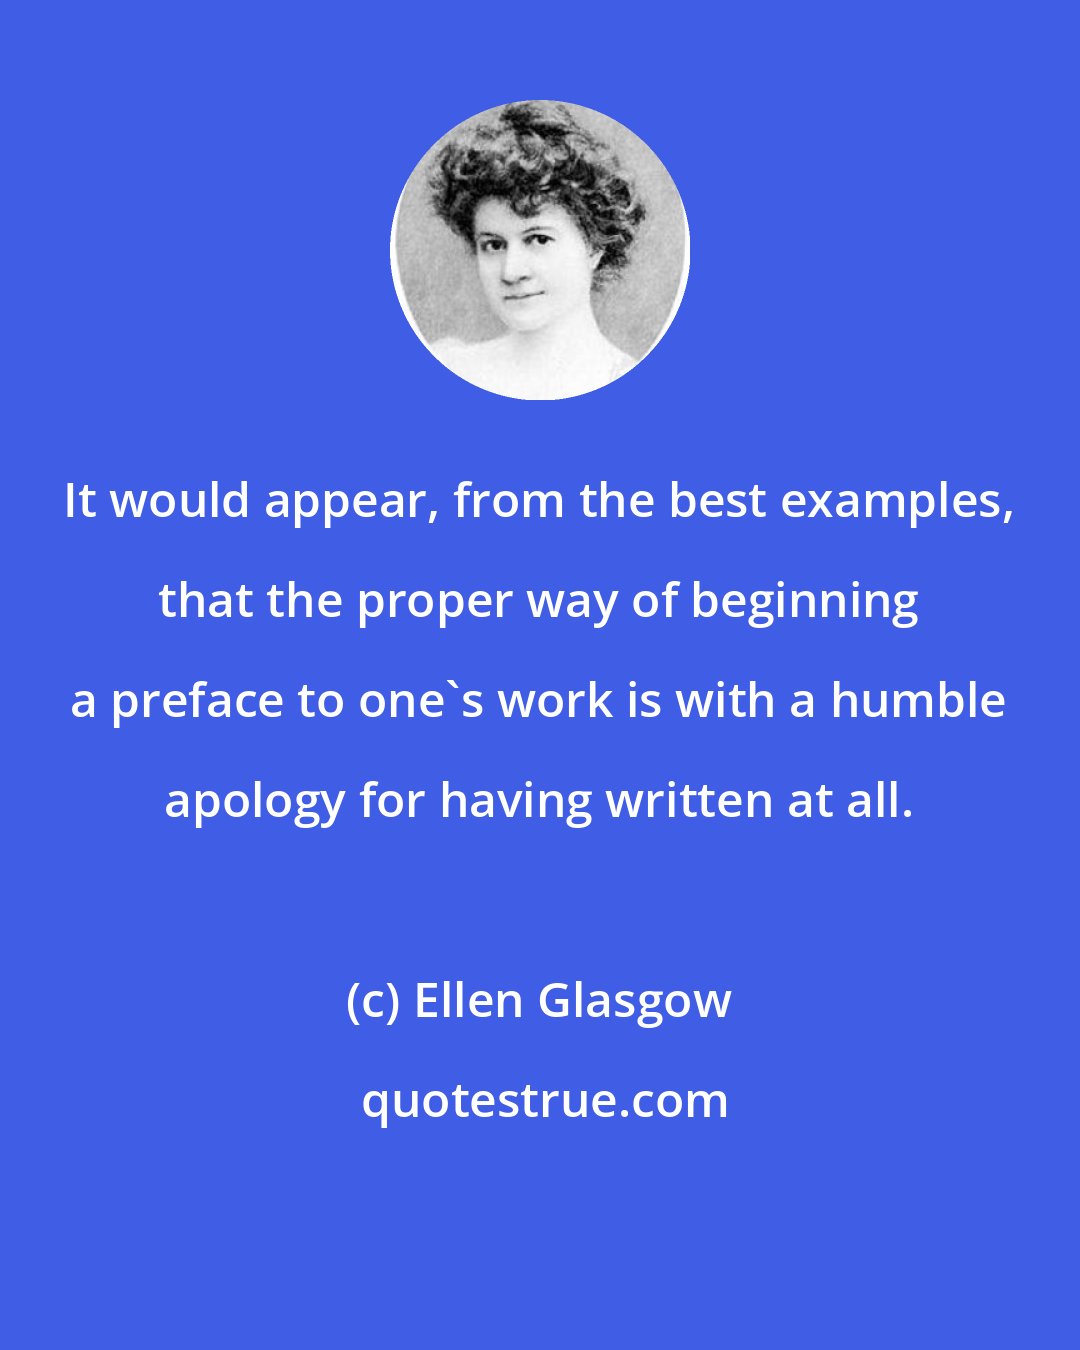 Ellen Glasgow: It would appear, from the best examples, that the proper way of beginning a preface to one's work is with a humble apology for having written at all.